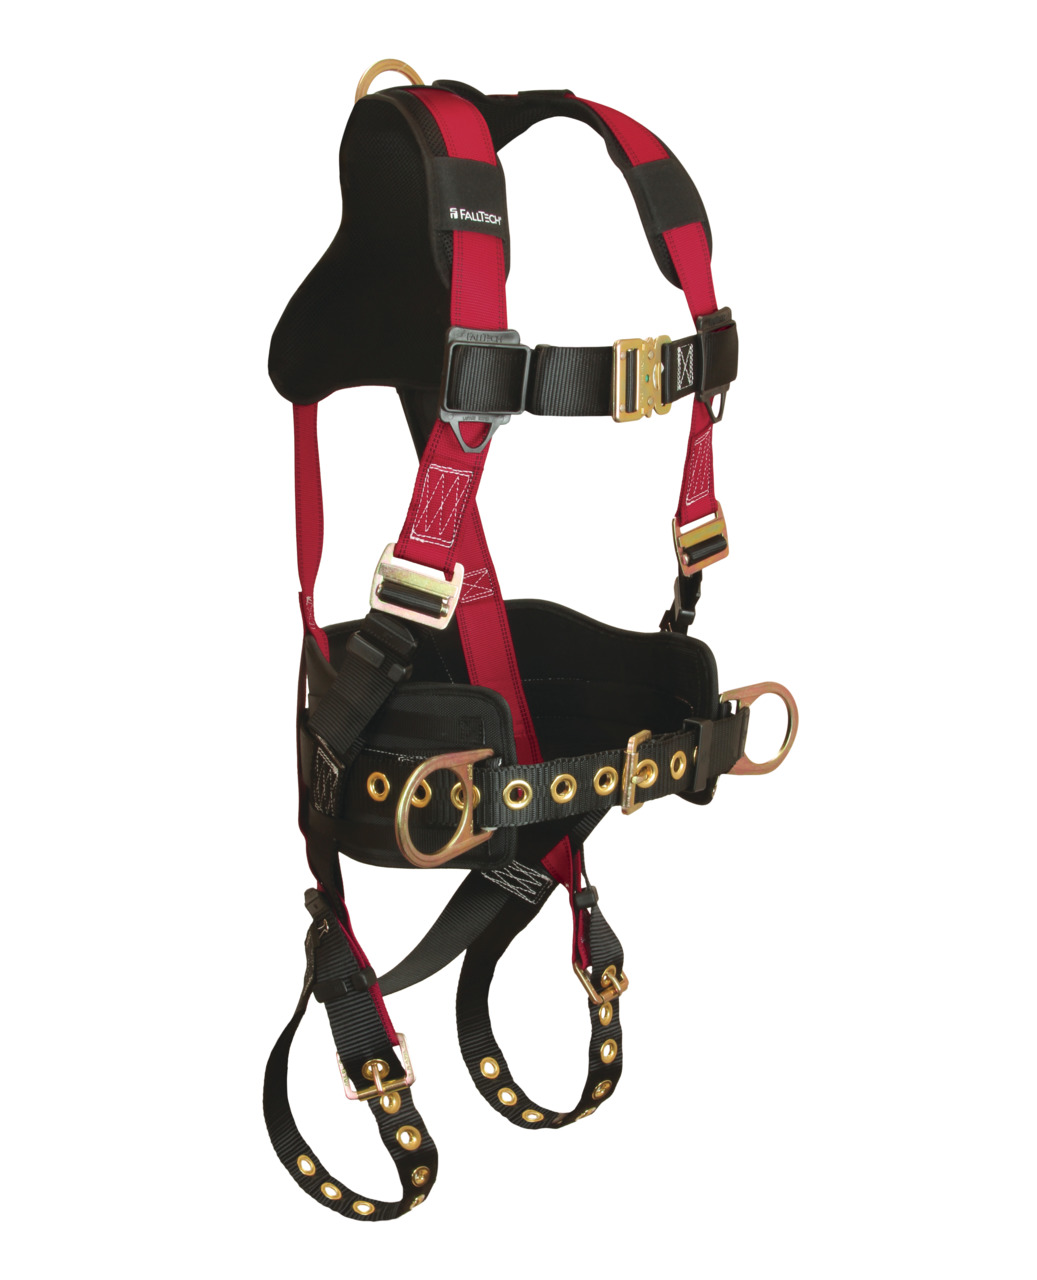 3D Fall Protection Safety Body Harness